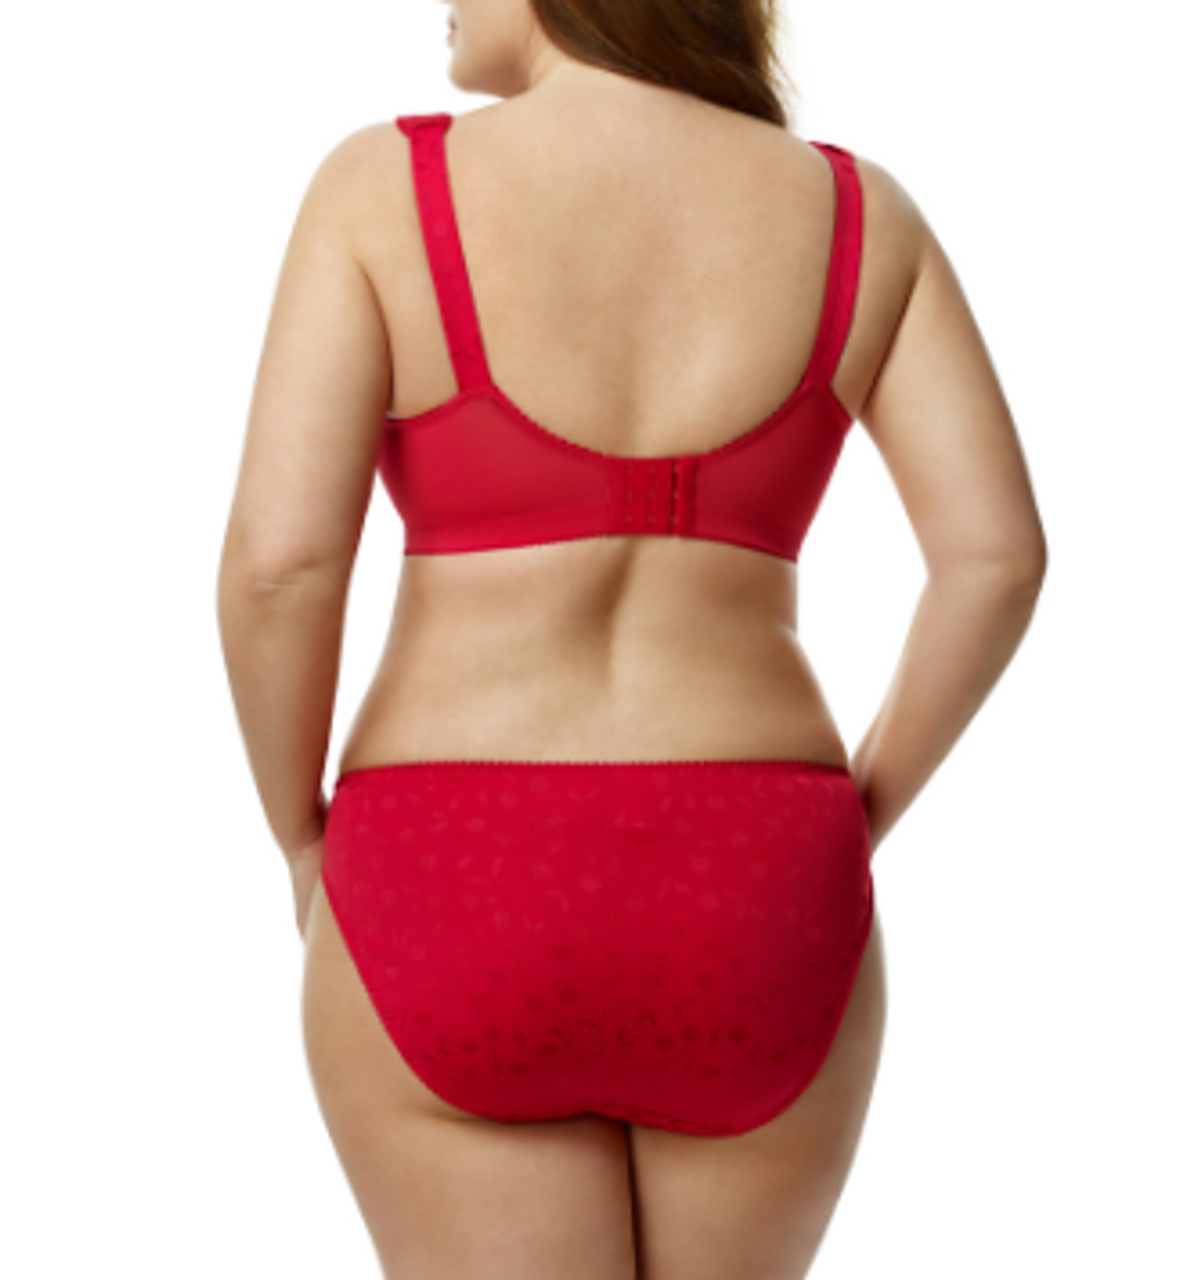 Elila Jacquard Softcup Bra in Red - Busted Bra Shop